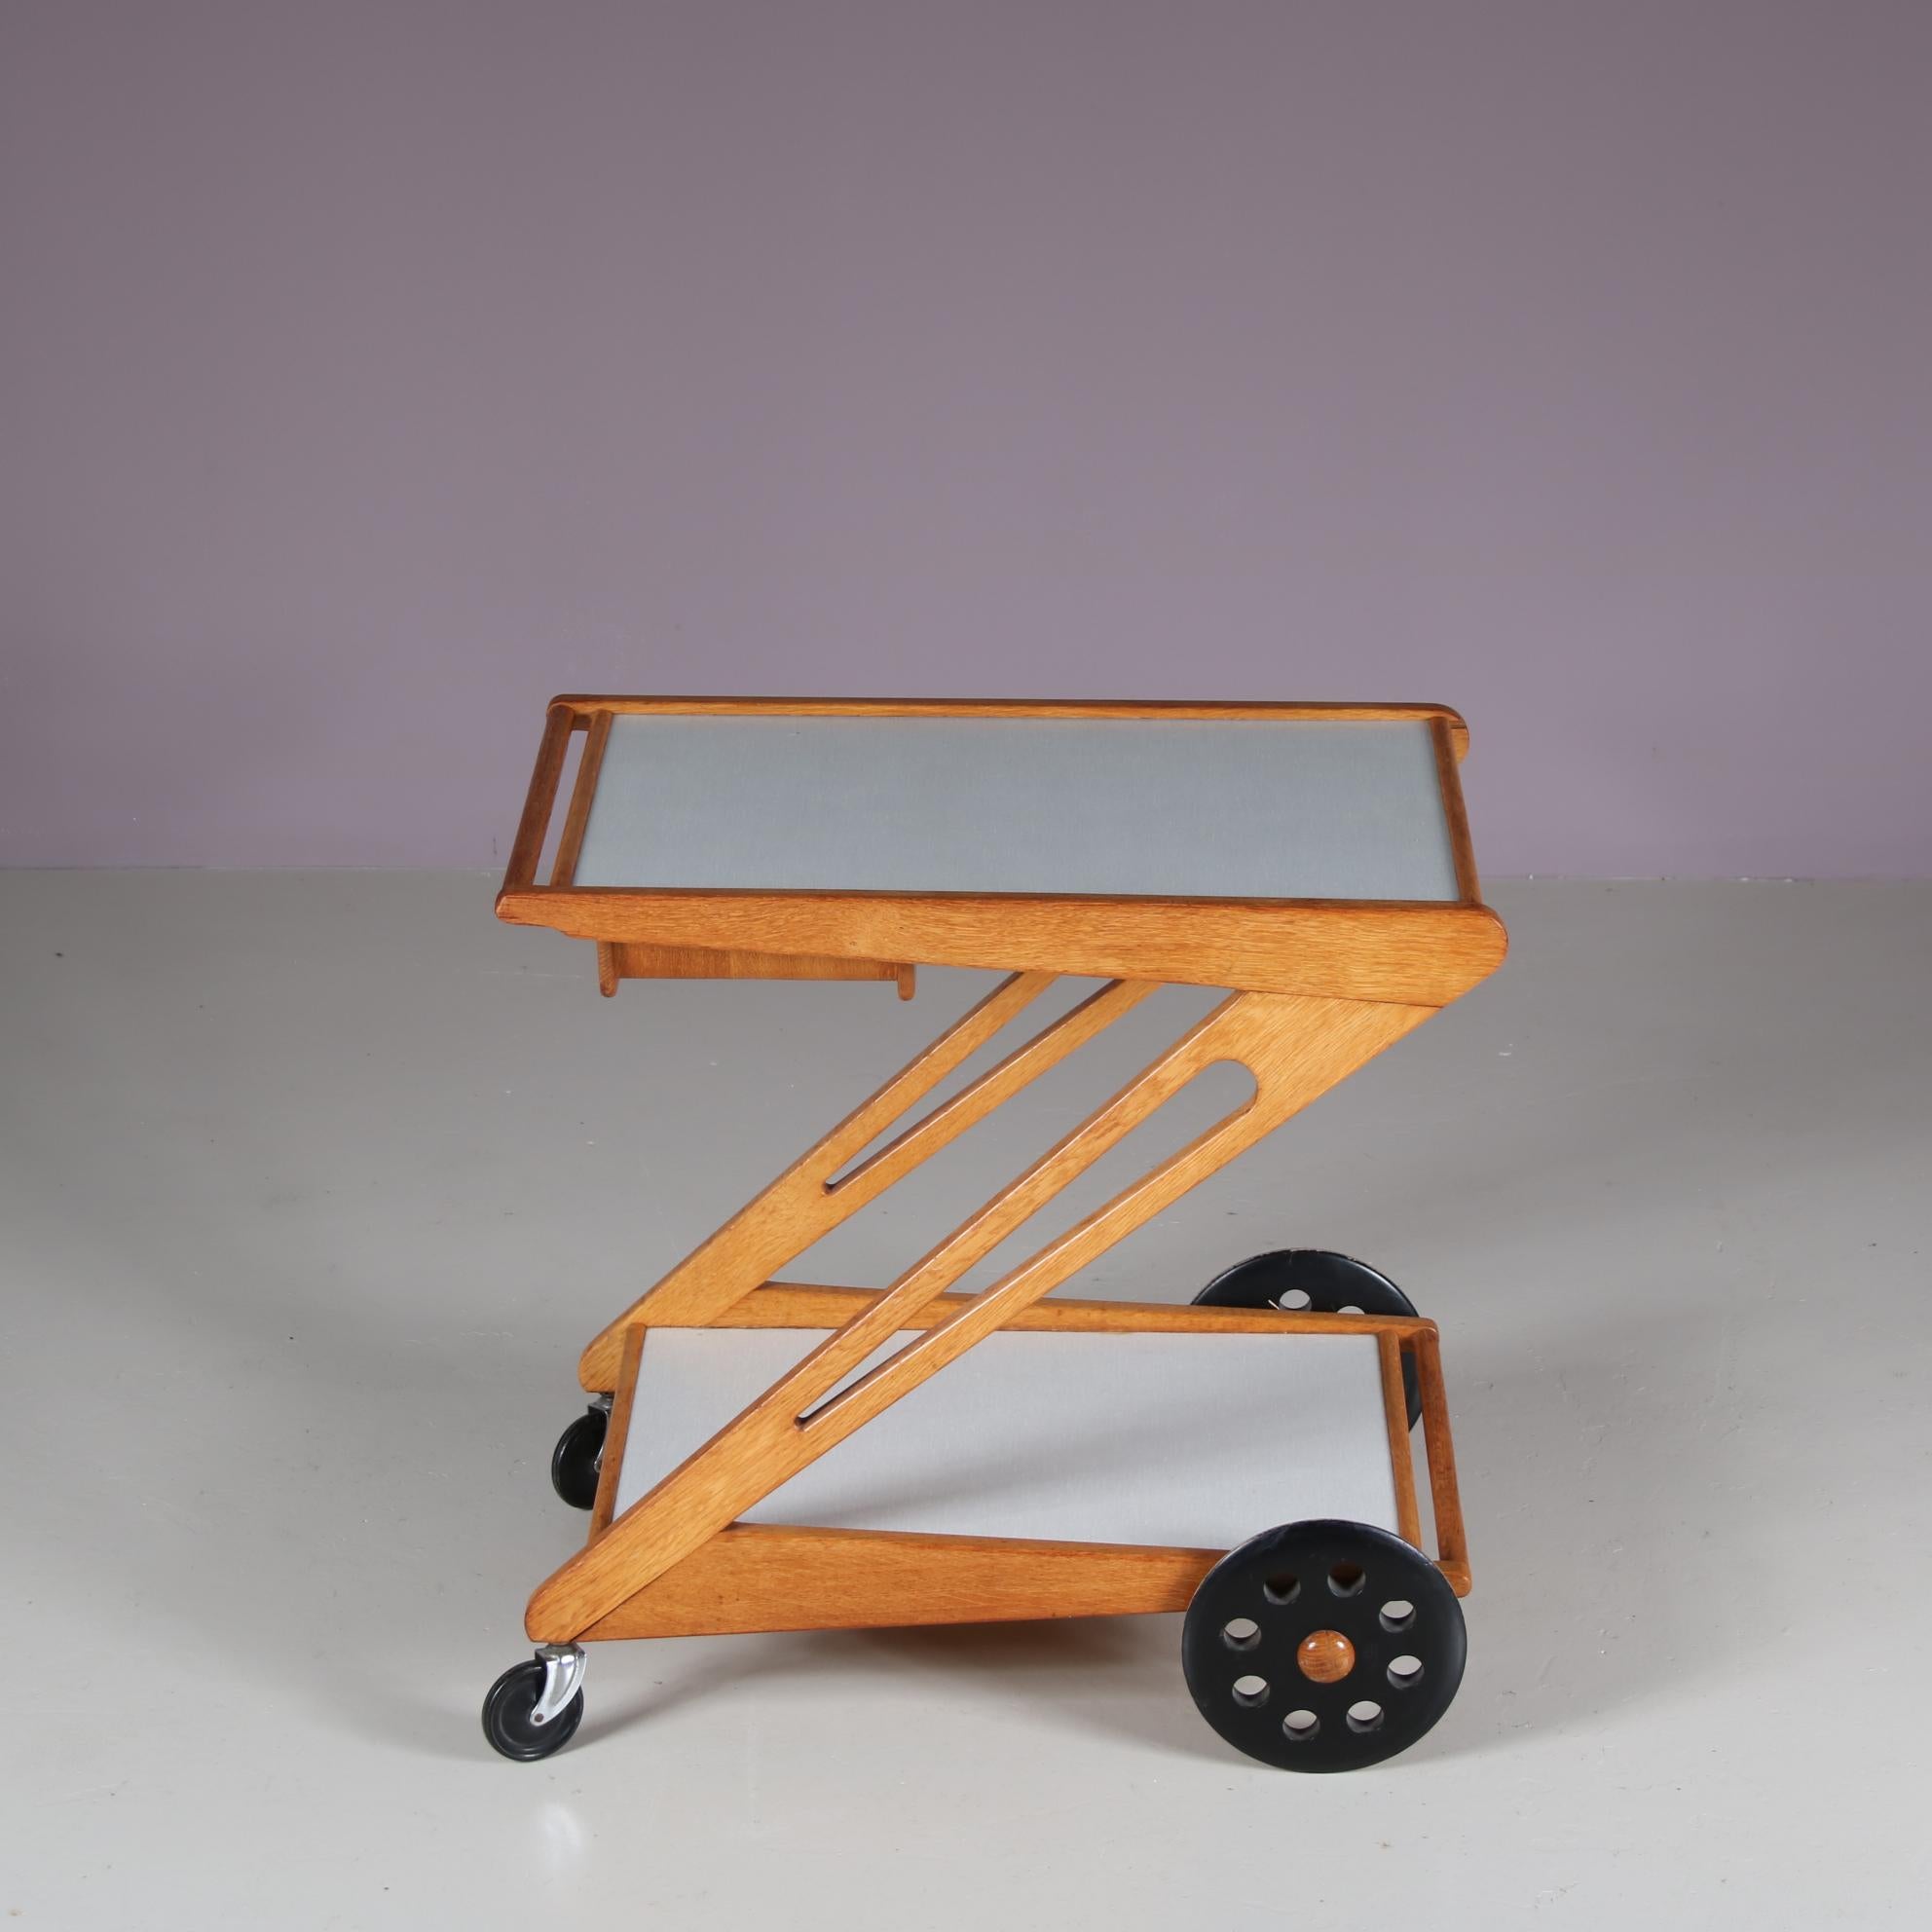 The “Mobilo PE03” trolley was designed by Cees Braakman and manufactured by Pastoe in the Netherlands around 1950.

It features a birch frame with white laminated shelves and a handle on top for easy maneuverability. The trolley has a modern and